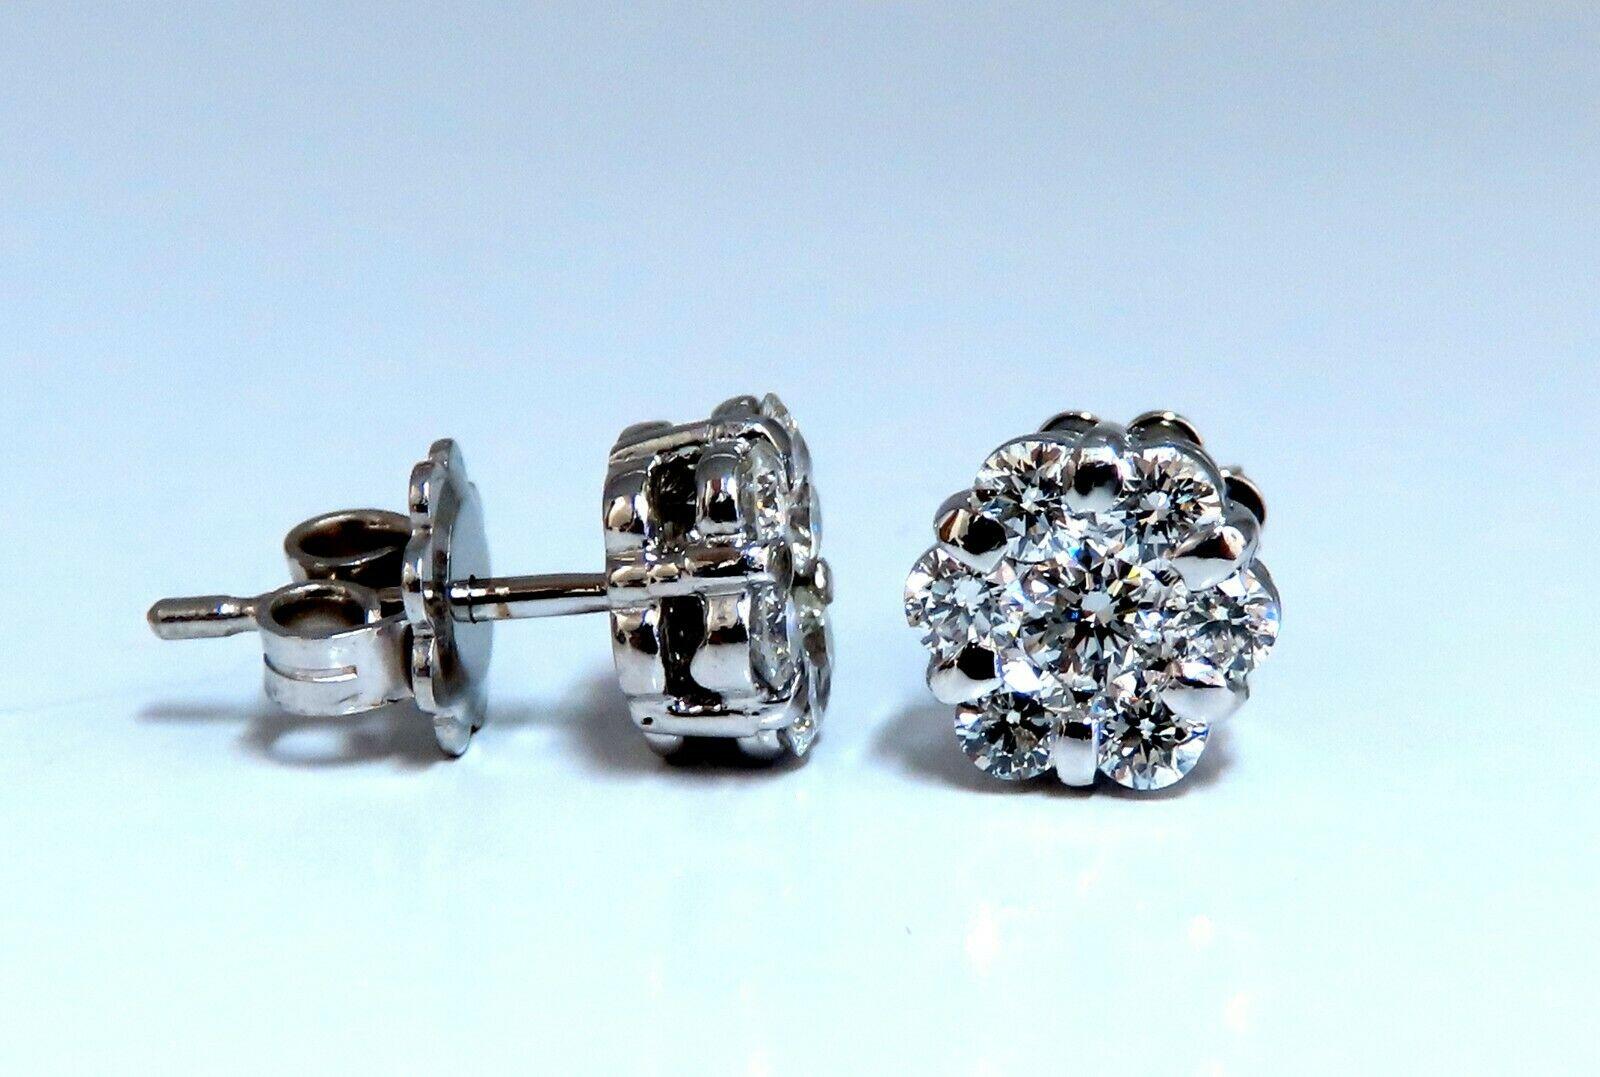 Cluster & Halo Stud Earrings.

1.10cts of natural round diamonds: 

G-color, Vs-2  clarity.

14kt. white gold

2.9 grams.

Earrings measure: .32 inch Diameter

Comfortable Butterfly

$4,000 Appraisal Certificate to accompany